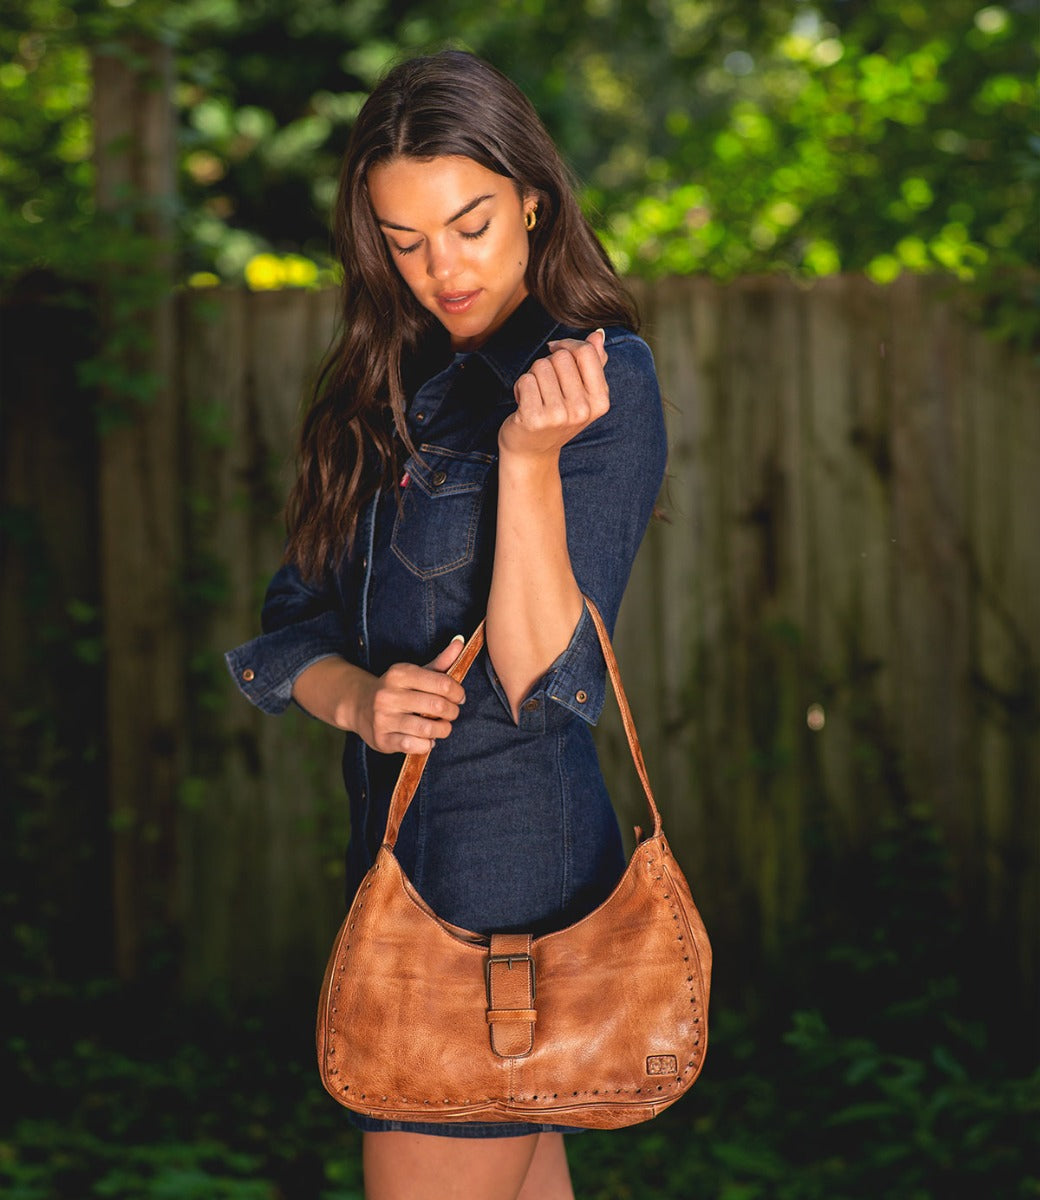 A woman wearing an Arleth denim dress holding a Bed Stu brown leather purse.